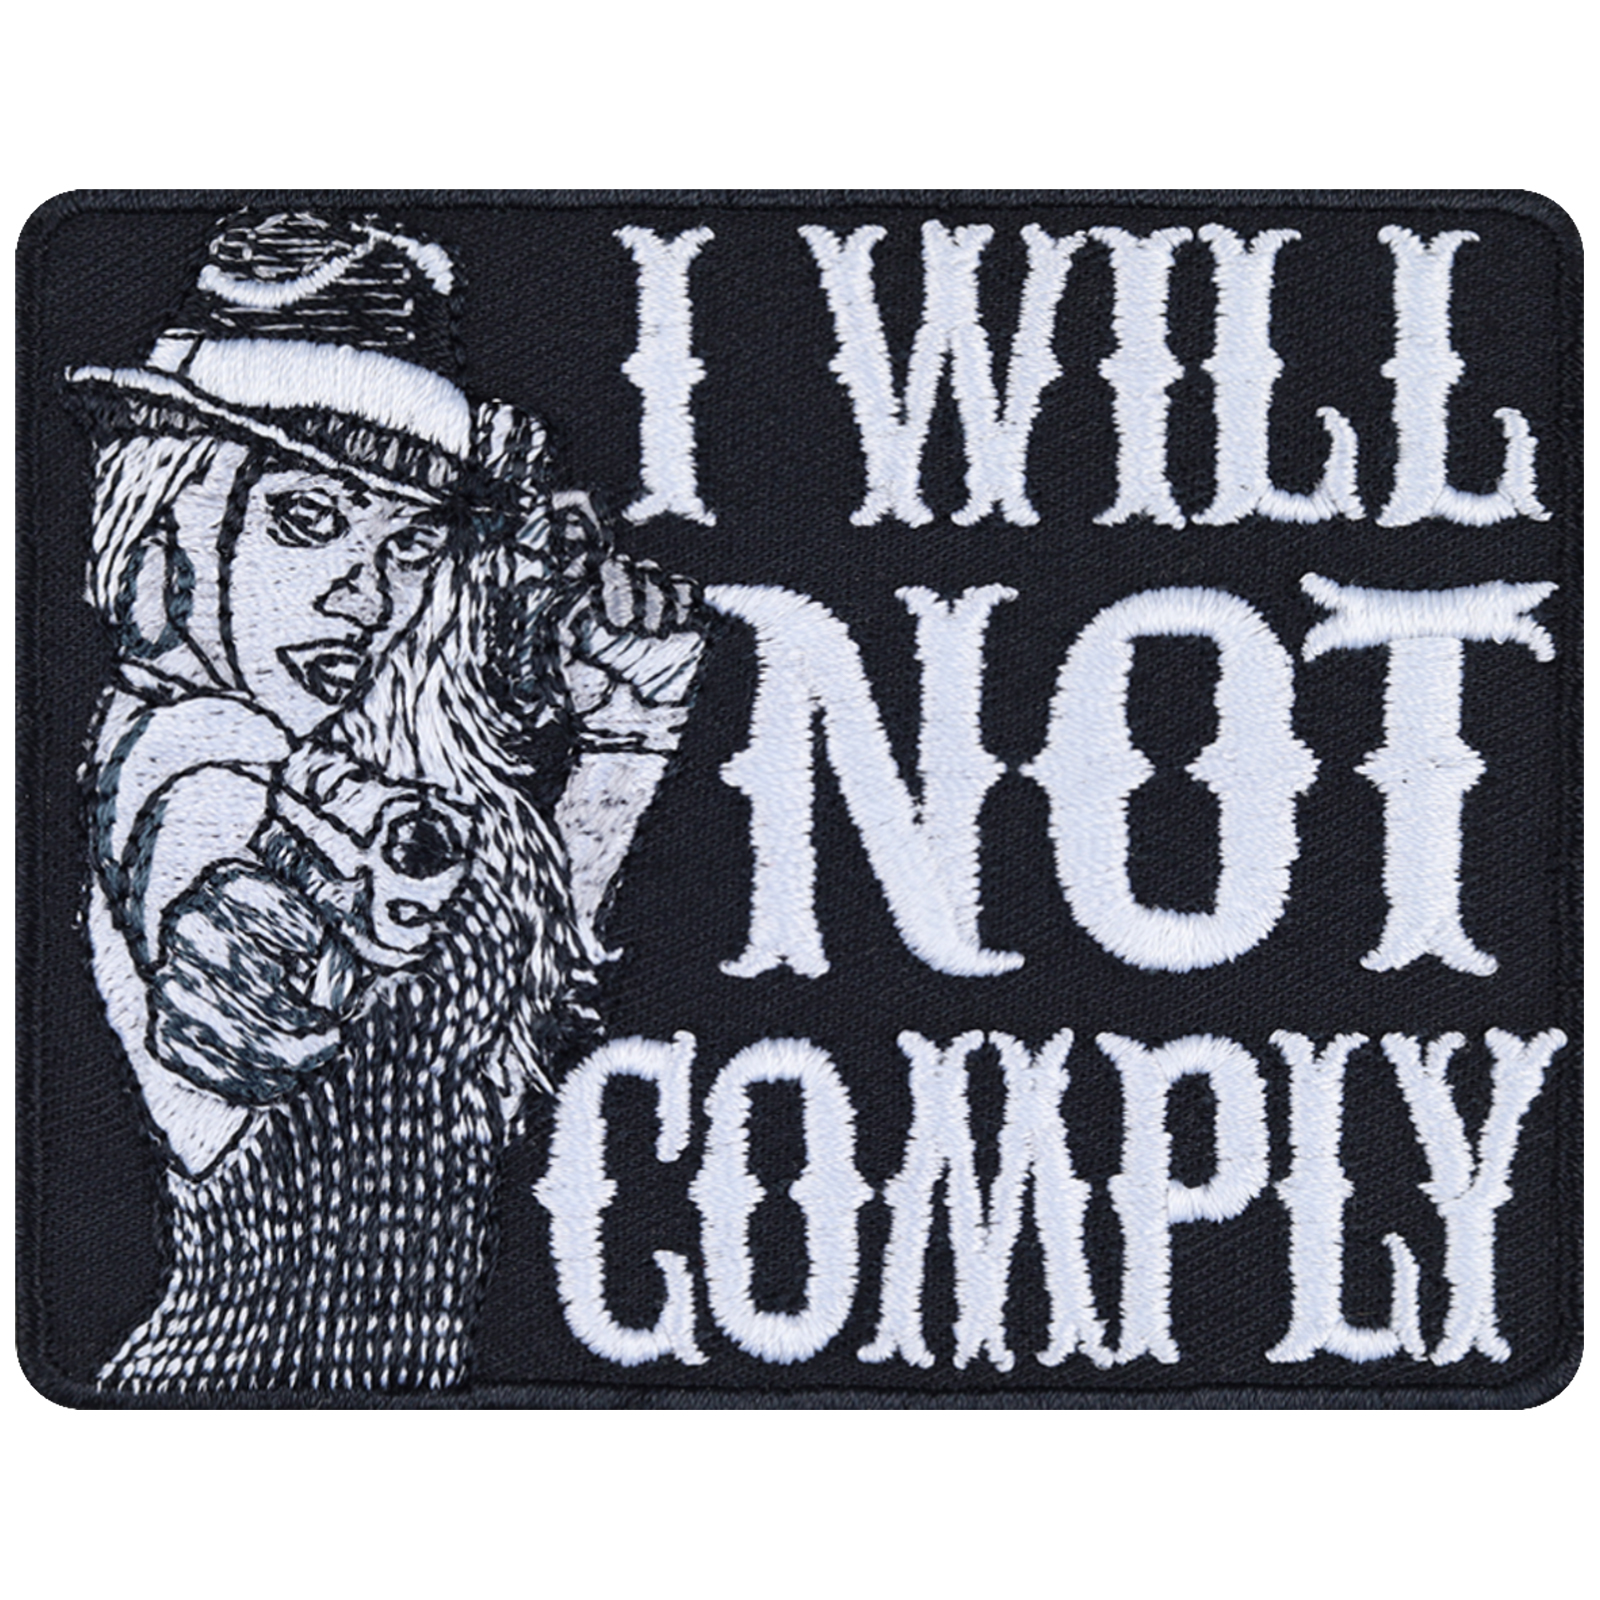 I will not comply - Patch